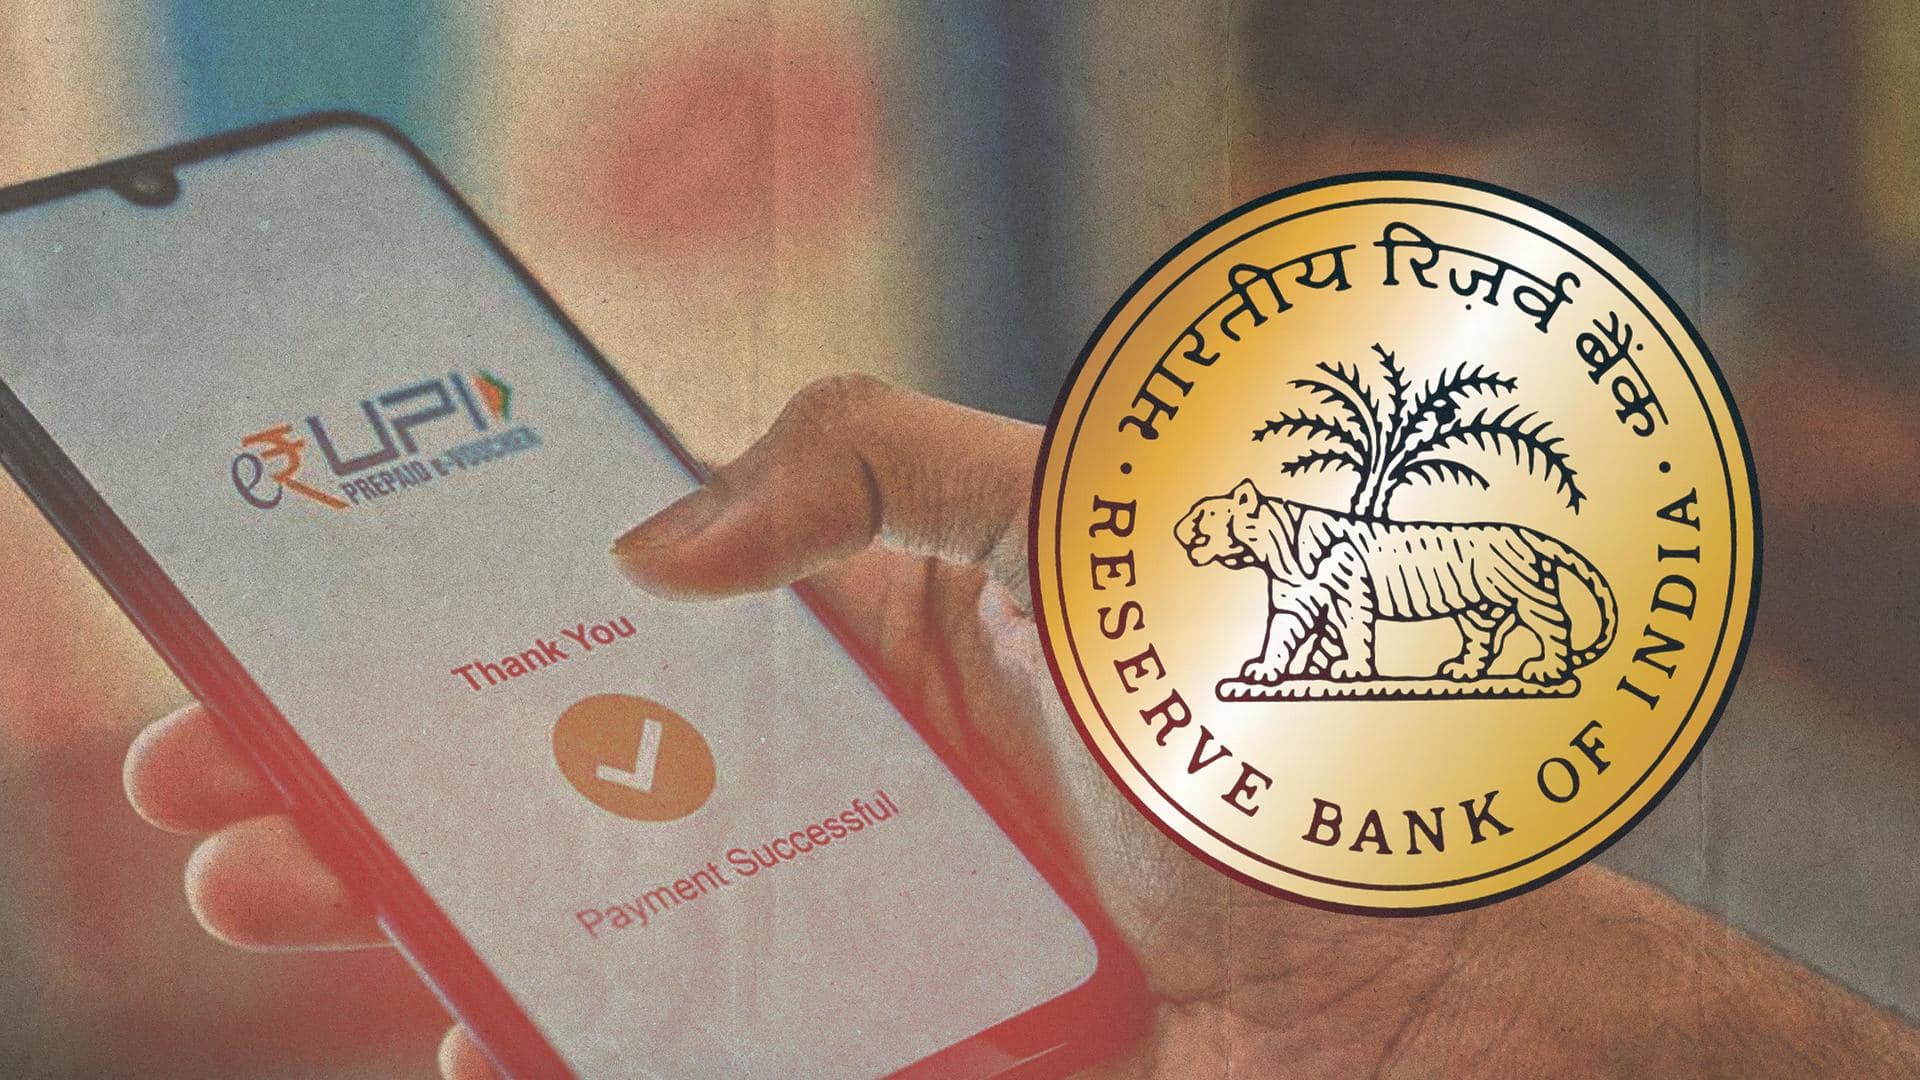 RBI shelves NUE, the UPI rival project: Here's why